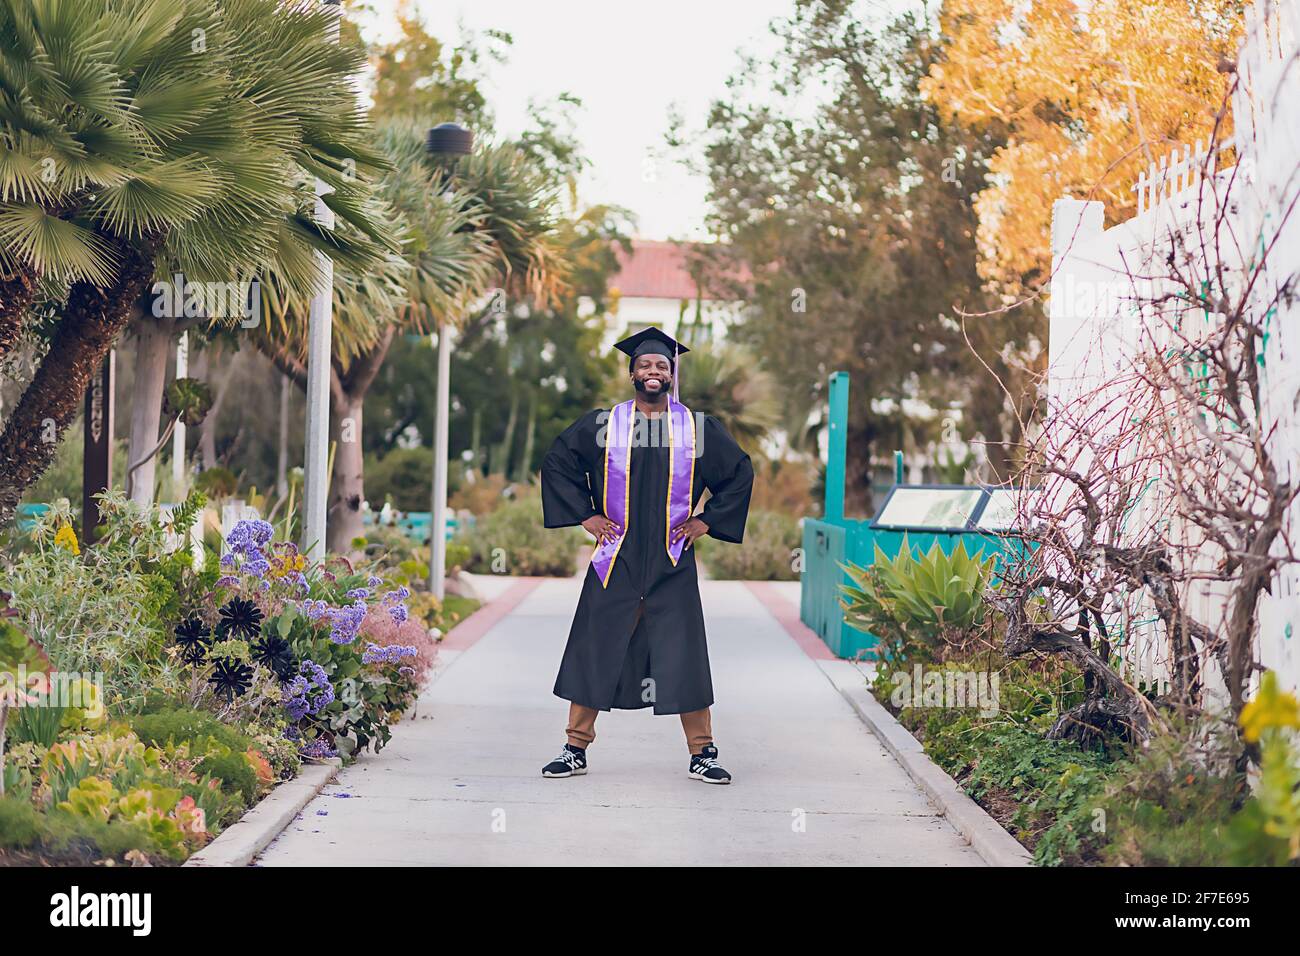 Young man graduating college, wearing a graduation gown/cap. Stock Photo